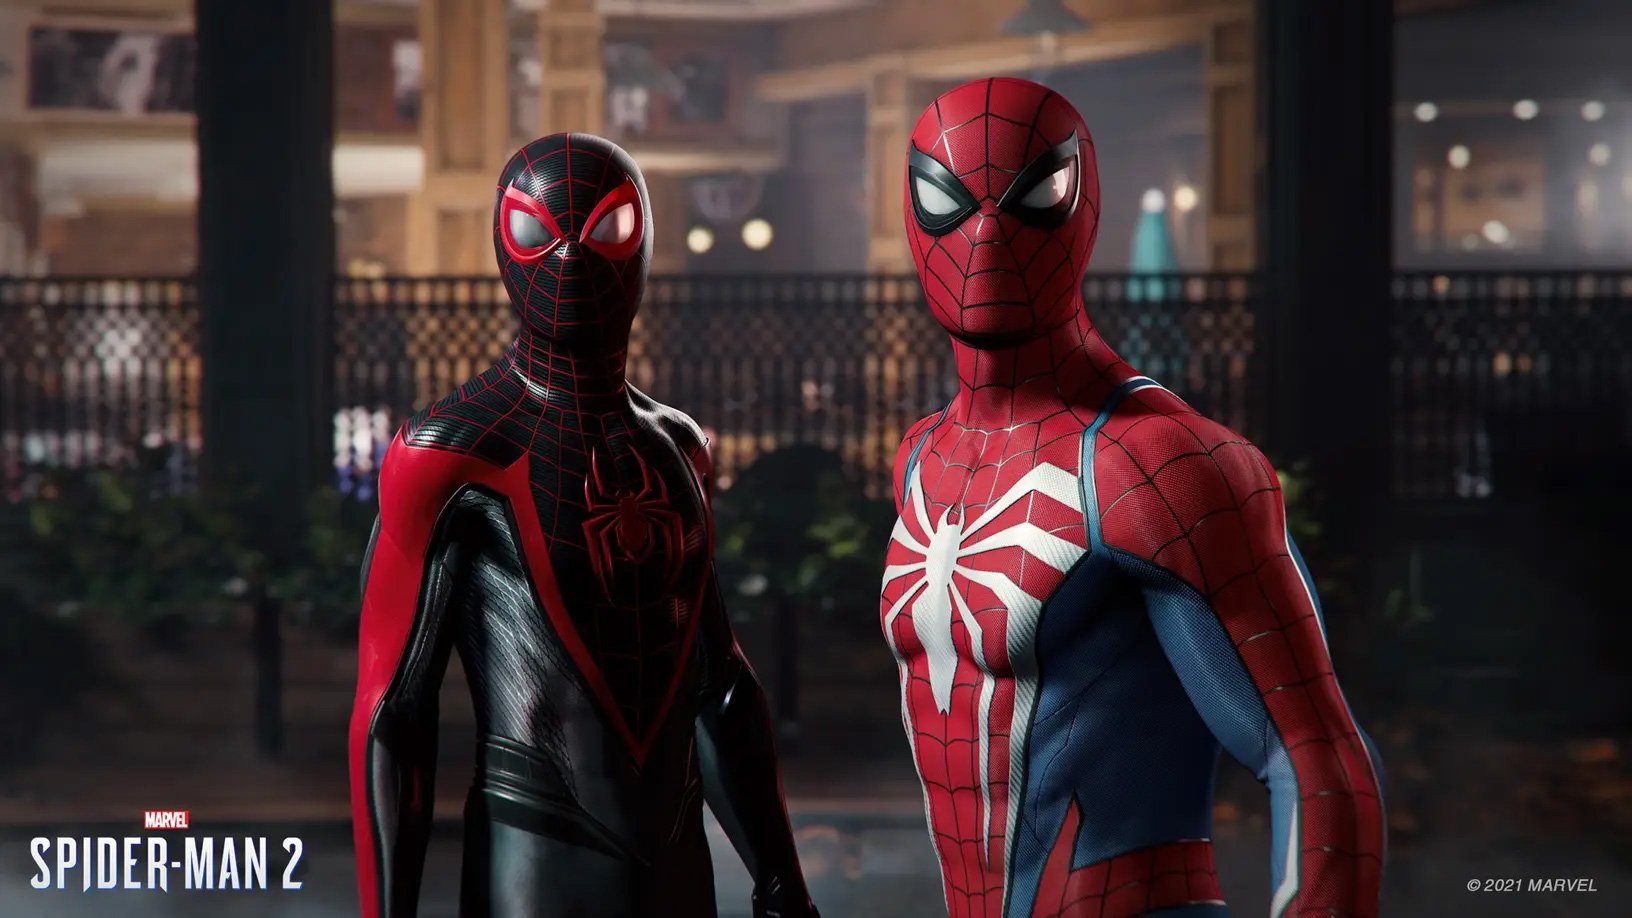 2023 preview: Spider-Man 2 is next year’s PlayStation blockbuster | VGC